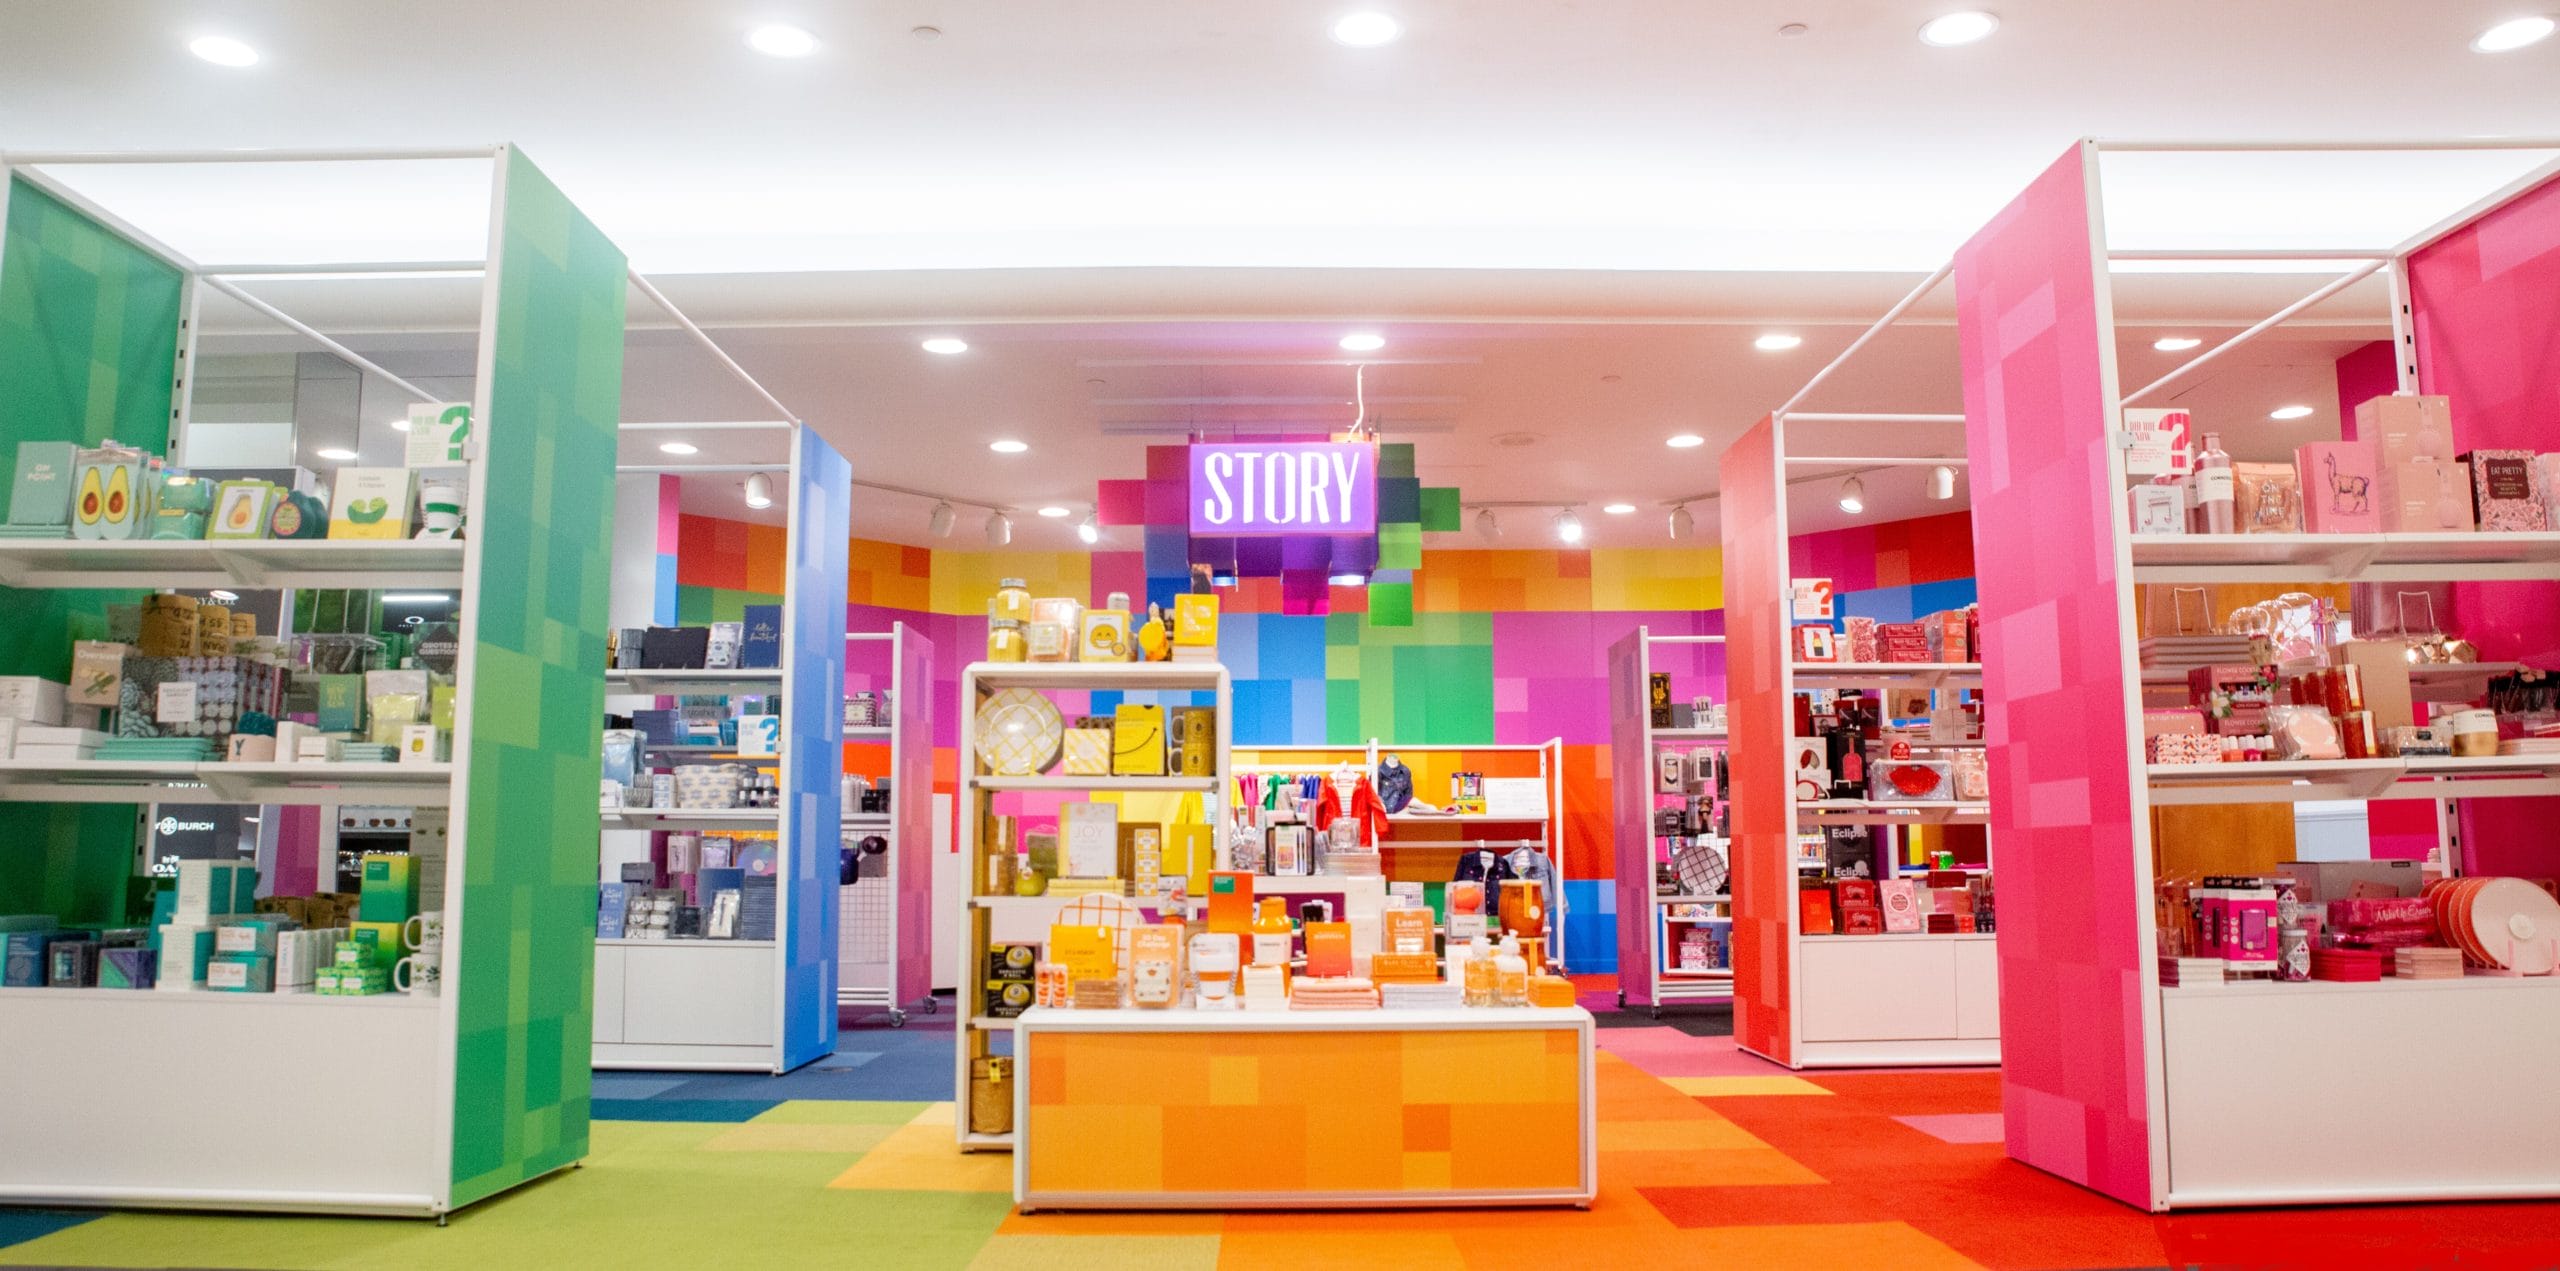 Sensational Retailtainment: the Fount of Surprises for Customers